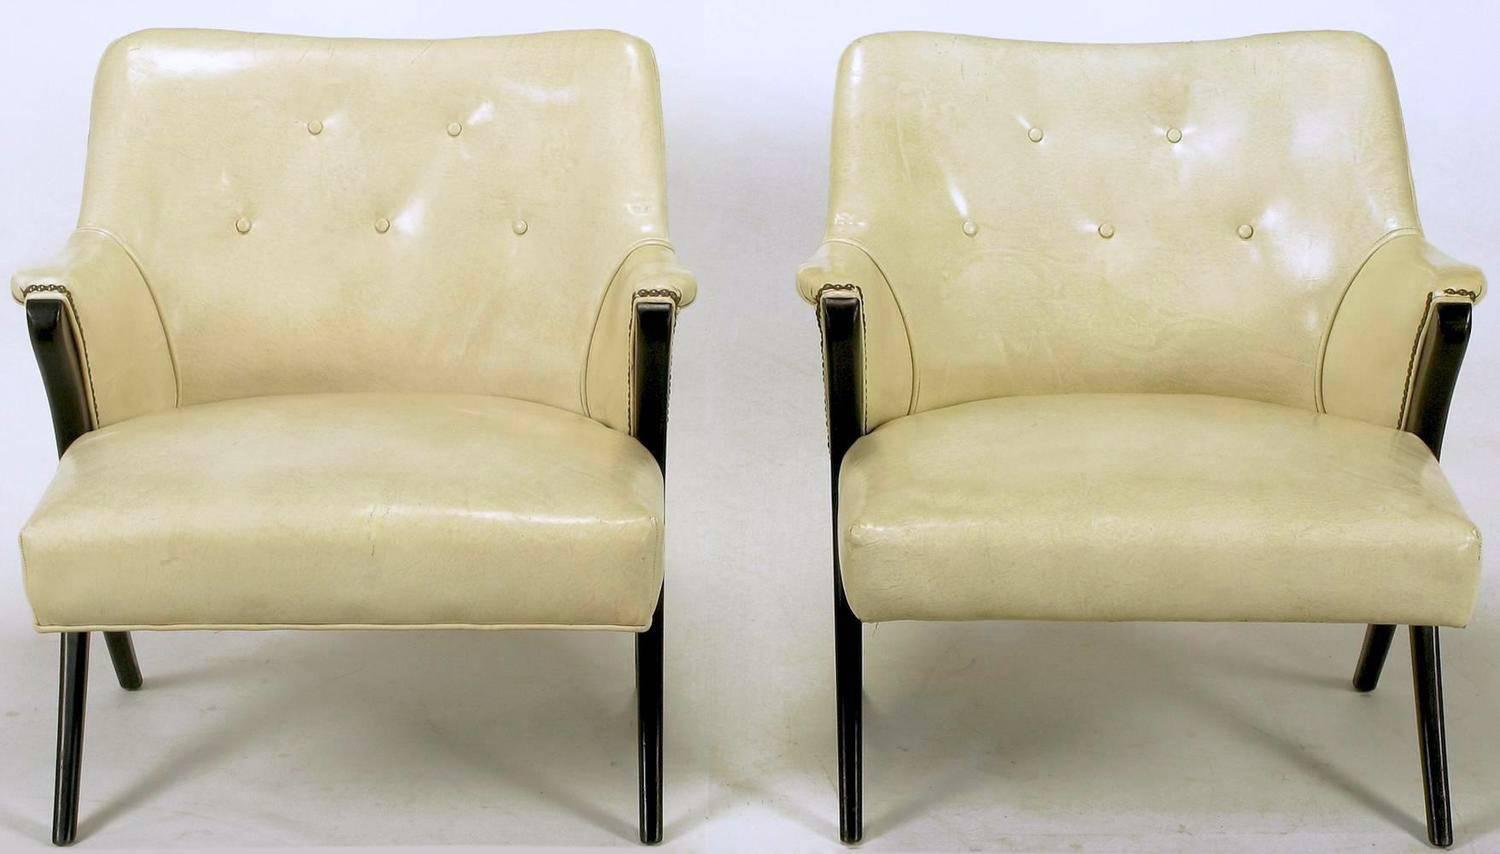 Pair of 1940s modernist club chairs in original bone glazed leather upholstery. Ebonized mahogany arms and legs in a distinctive Y shape. Brass nailhead accents. One chair has bottom welt and one does not. Possibly the inspiration for the Karpen Co.